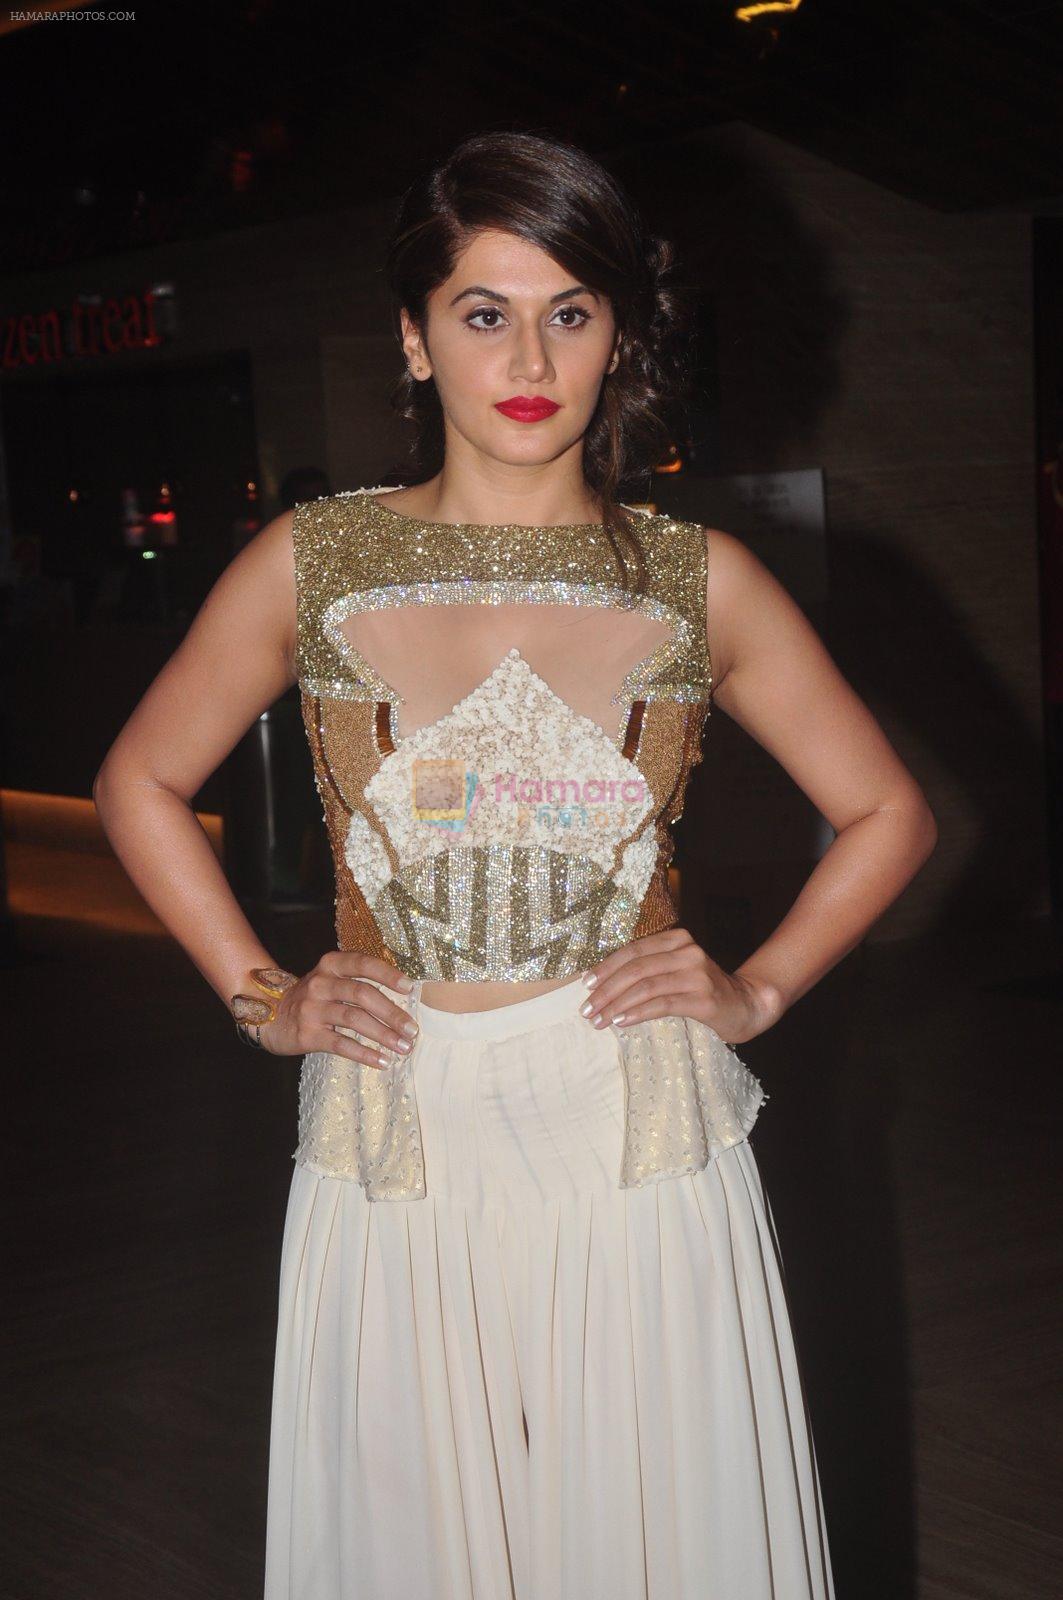 Tapsee Pannu at Baby trailor launch in PVR, Mumbai on 3rd Dec 2014